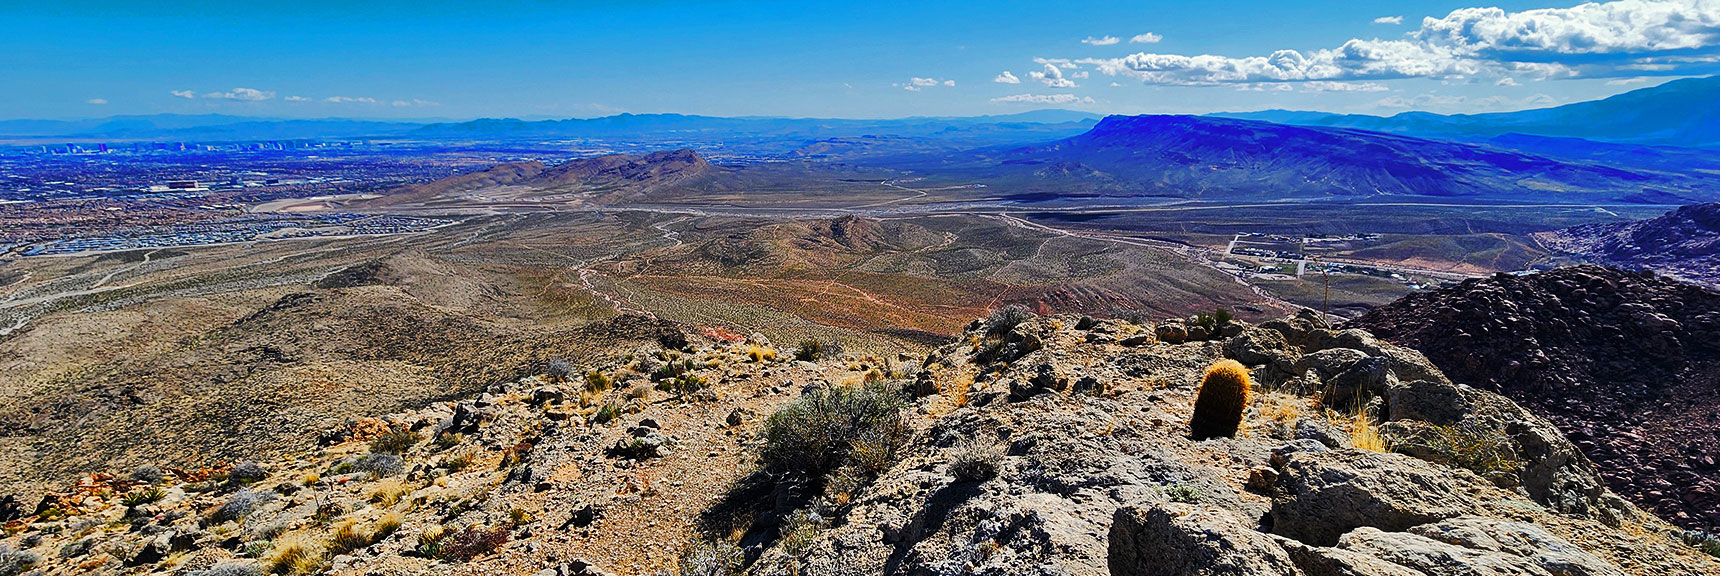 Brownstone Basin to the Left; Calico Basin to the Right. | Gray Cap Ridge Southeast Summit | La Madre Mountains Wilderness, Nevada